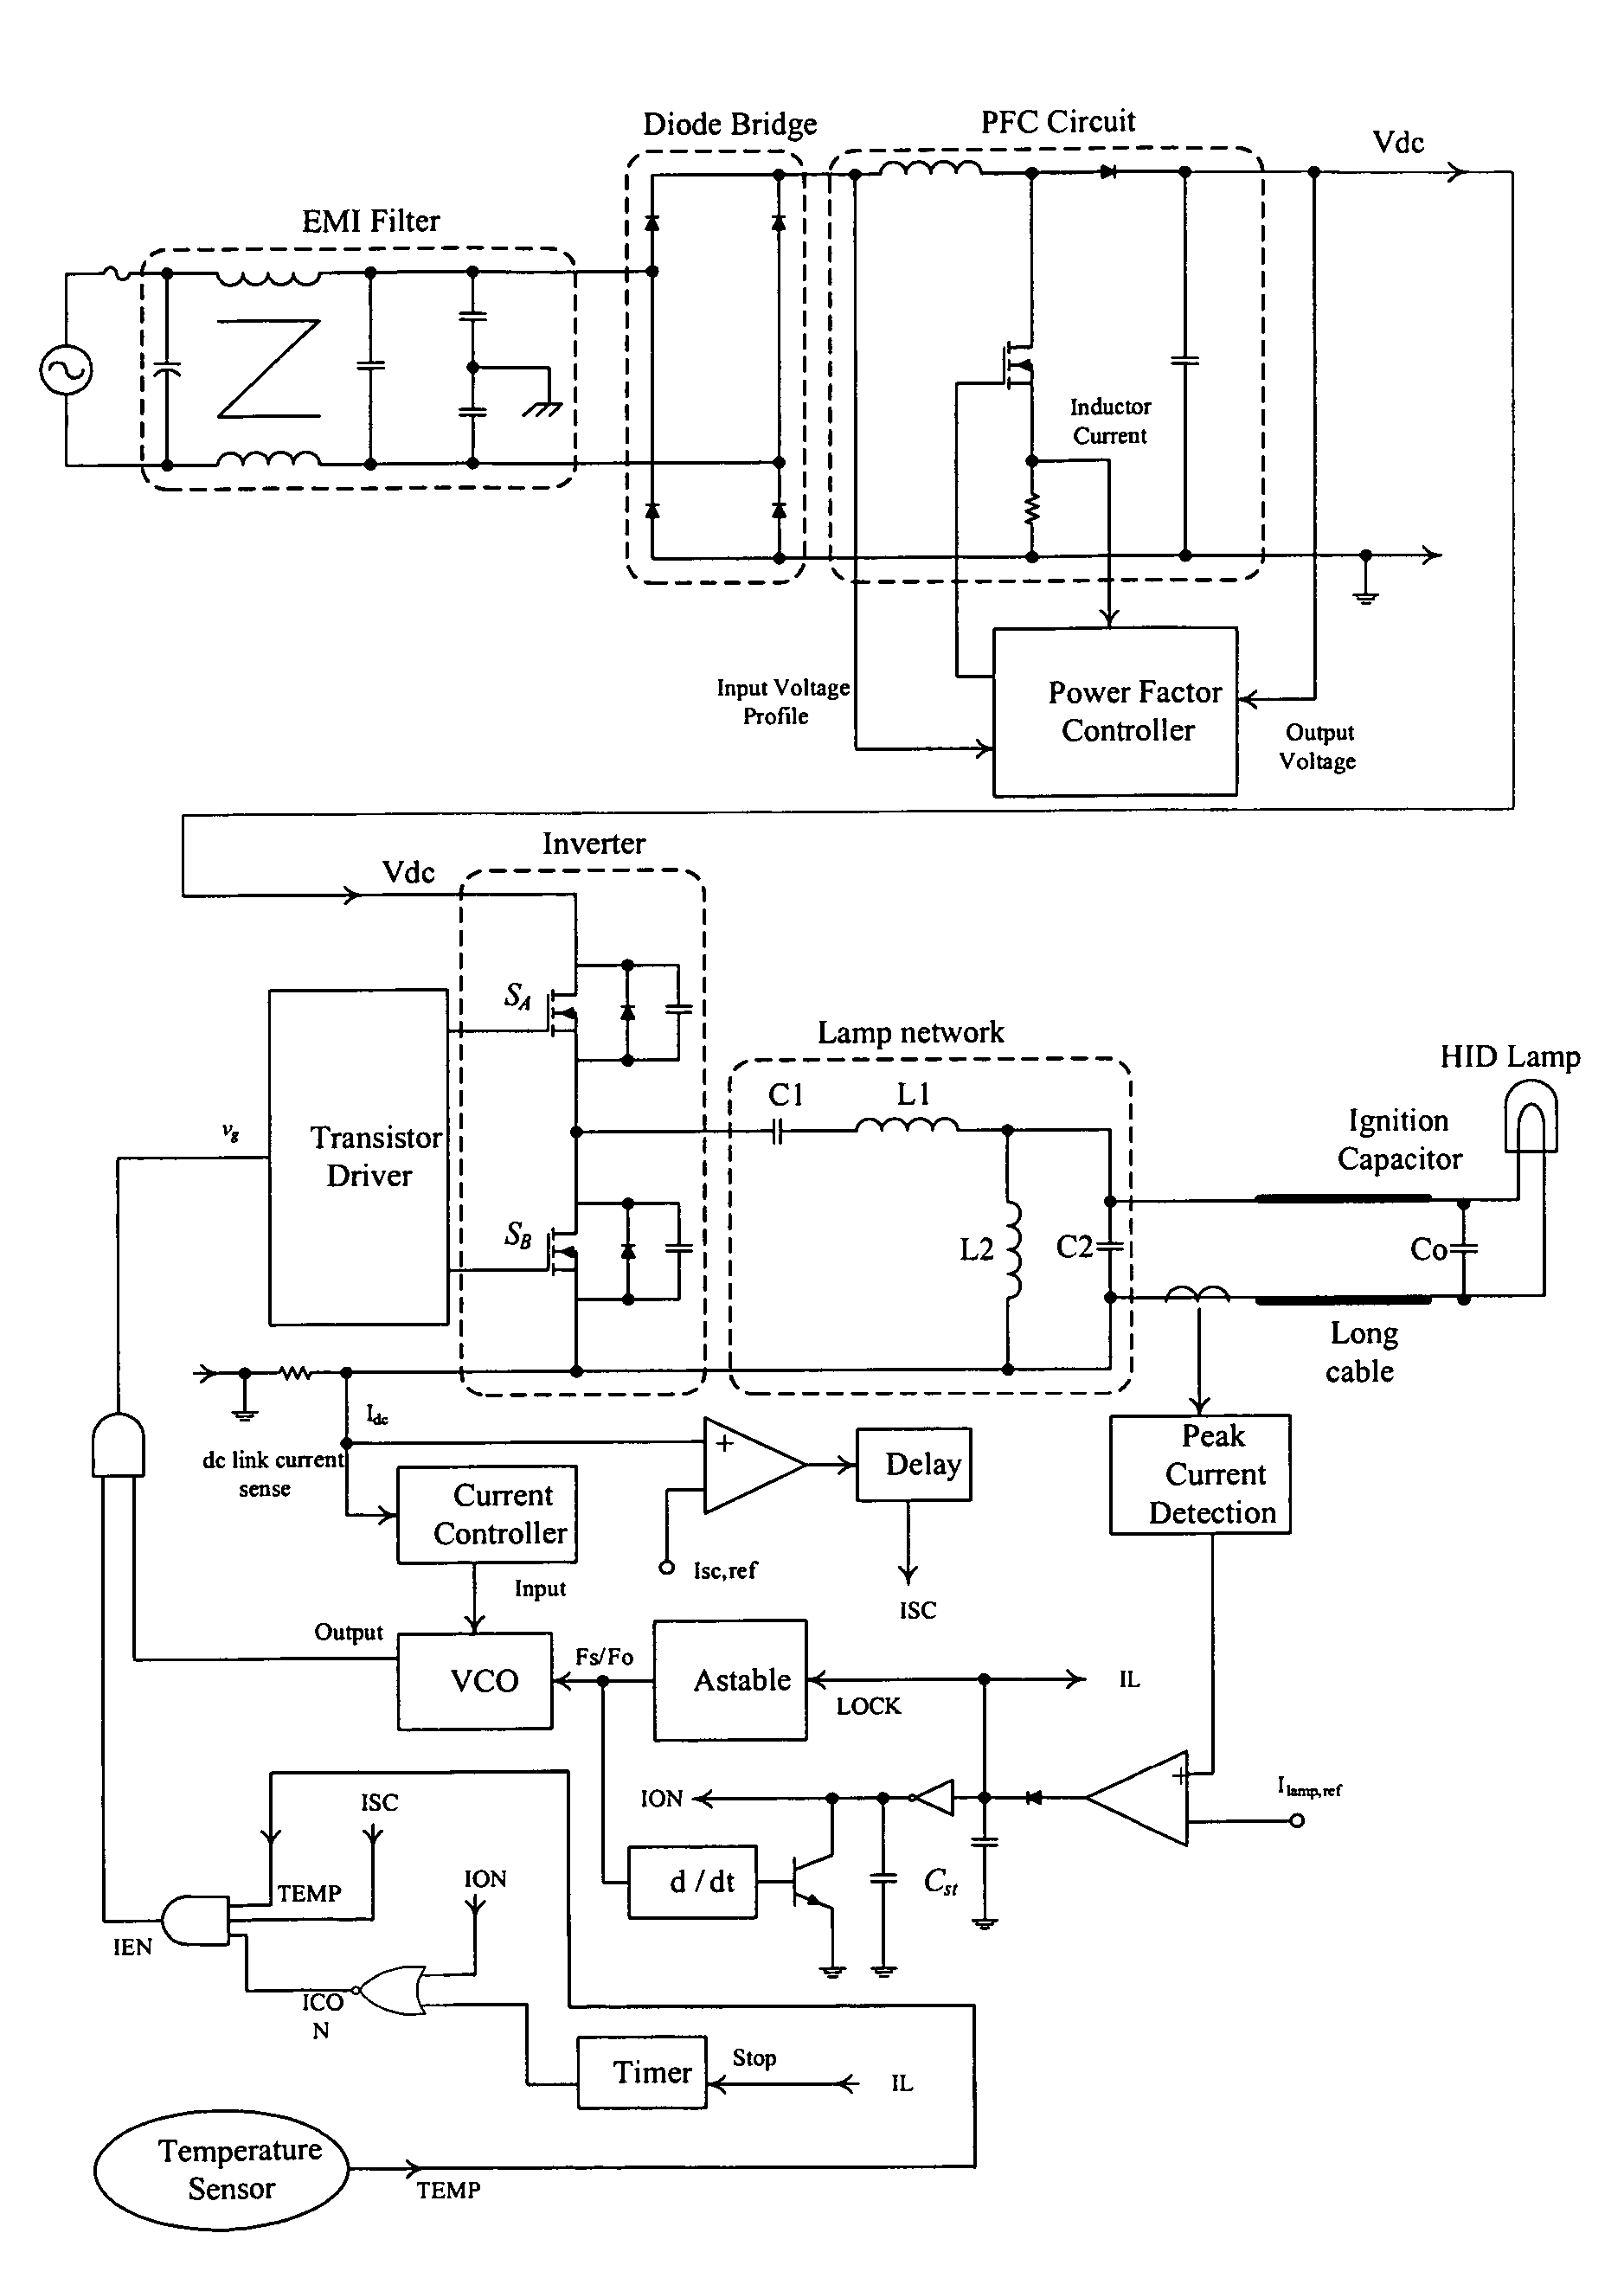 Novel circuit designs and control techniques for high frequency electronic ballasts for high intensity discharge lamps